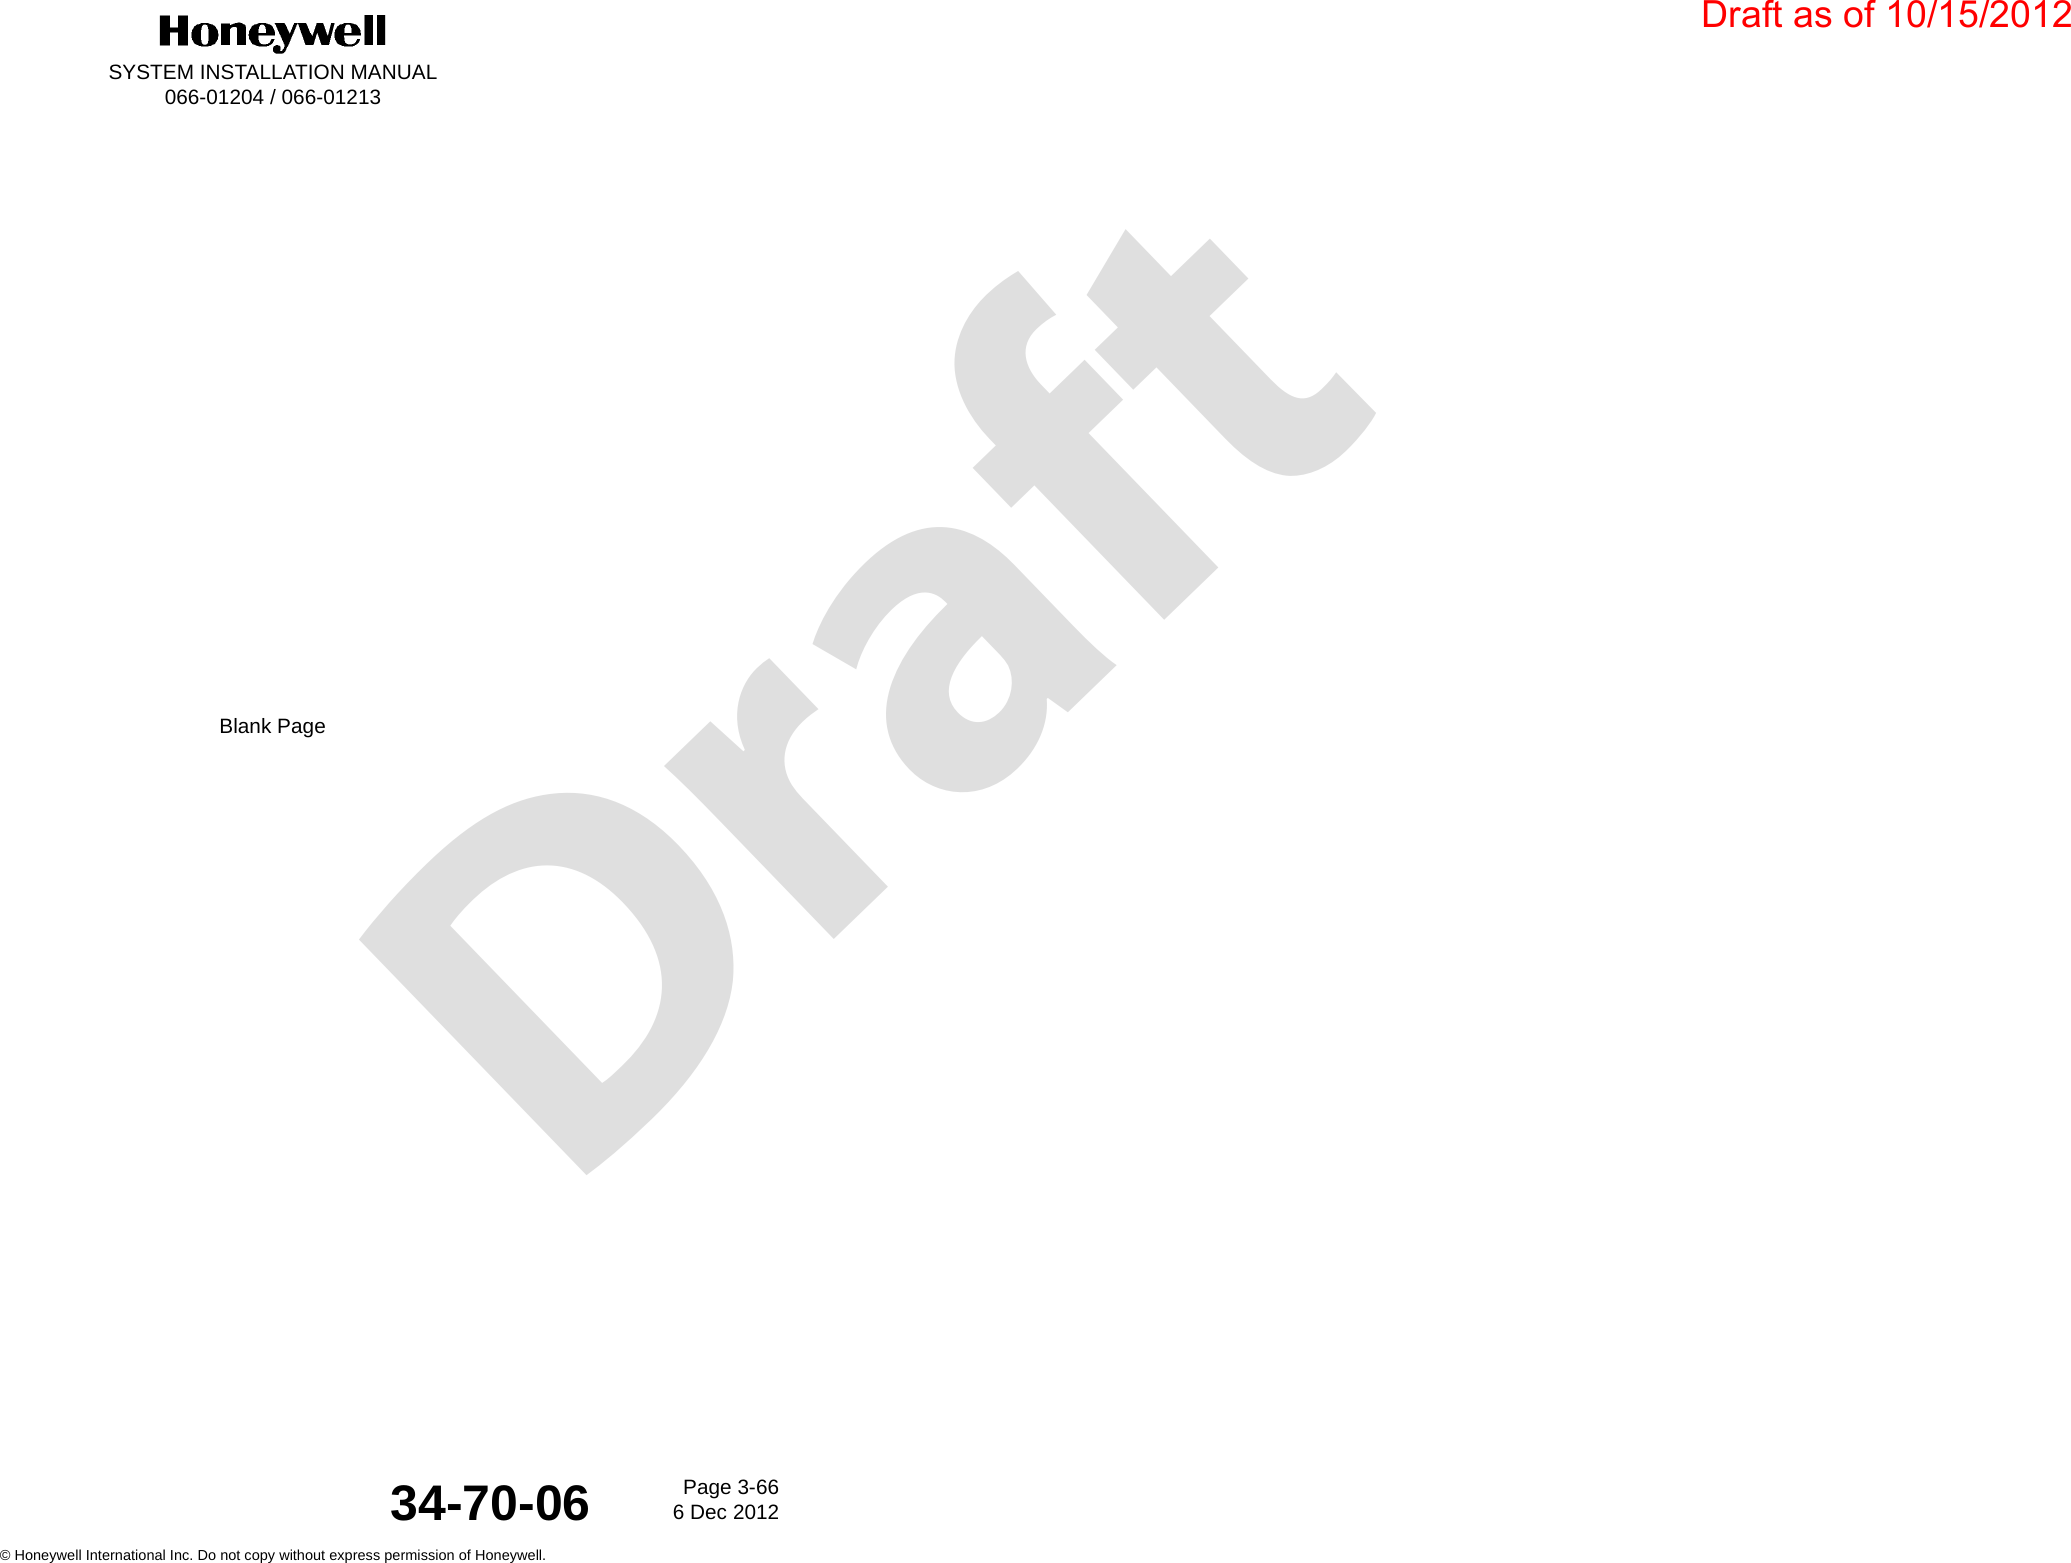 DraftSYSTEM INSTALLATION MANUAL066-01204 / 066-01213Page 3-666 Dec 2012© Honeywell International Inc. Do not copy without express permission of Honeywell.34-70-06Blank PageDraft as of 10/15/2012